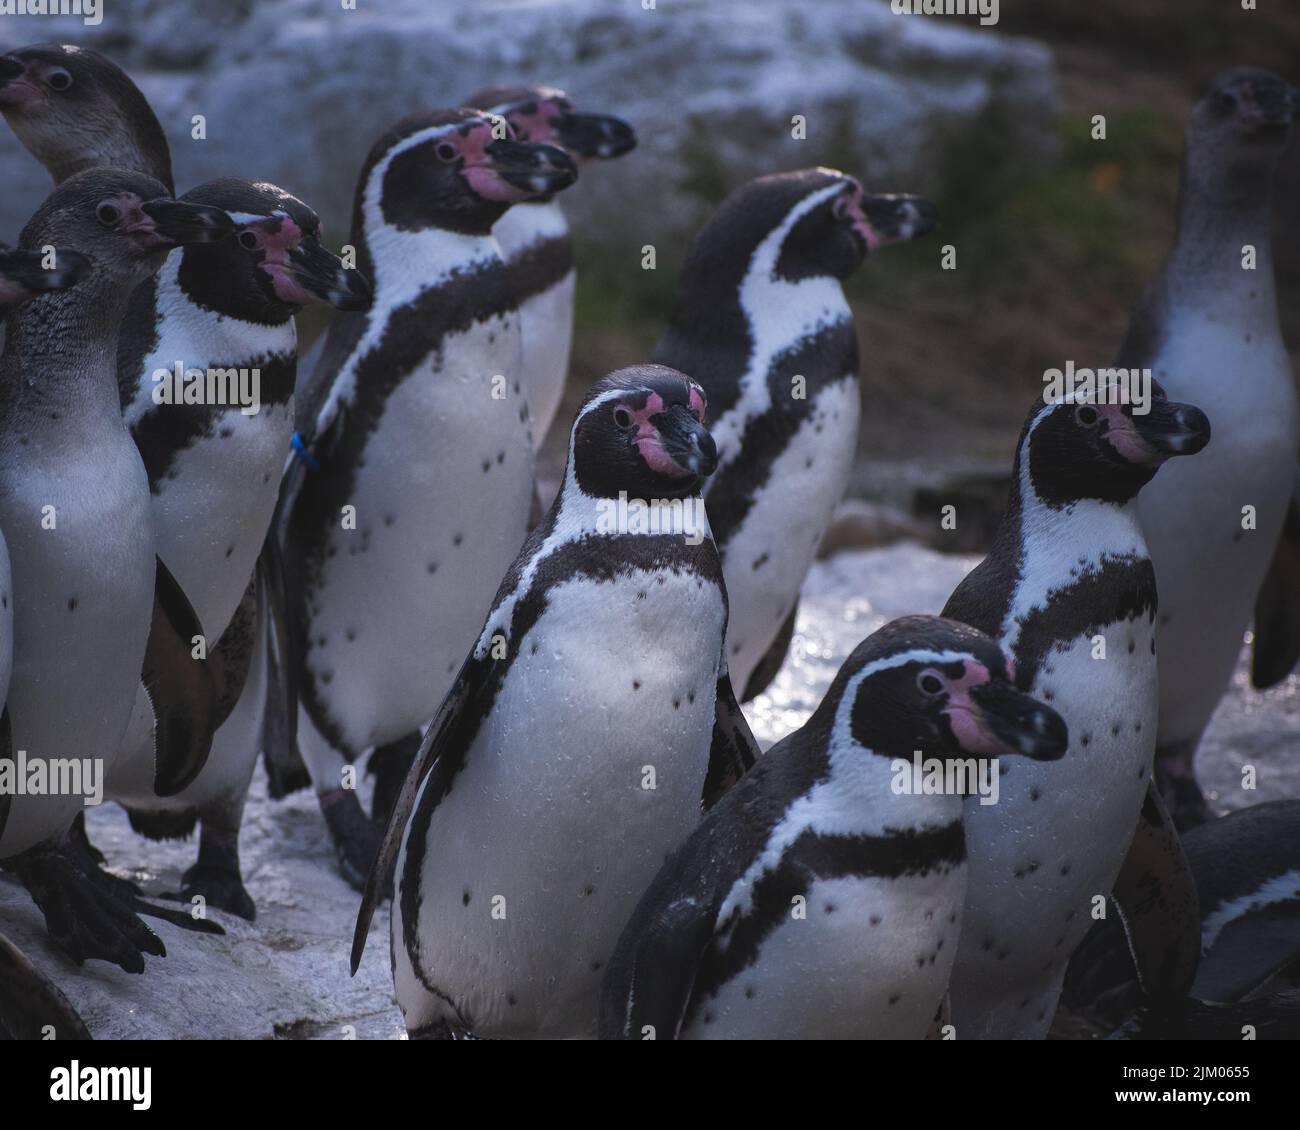 A group of Humboldt penguins standing on a big rock Stock Photo